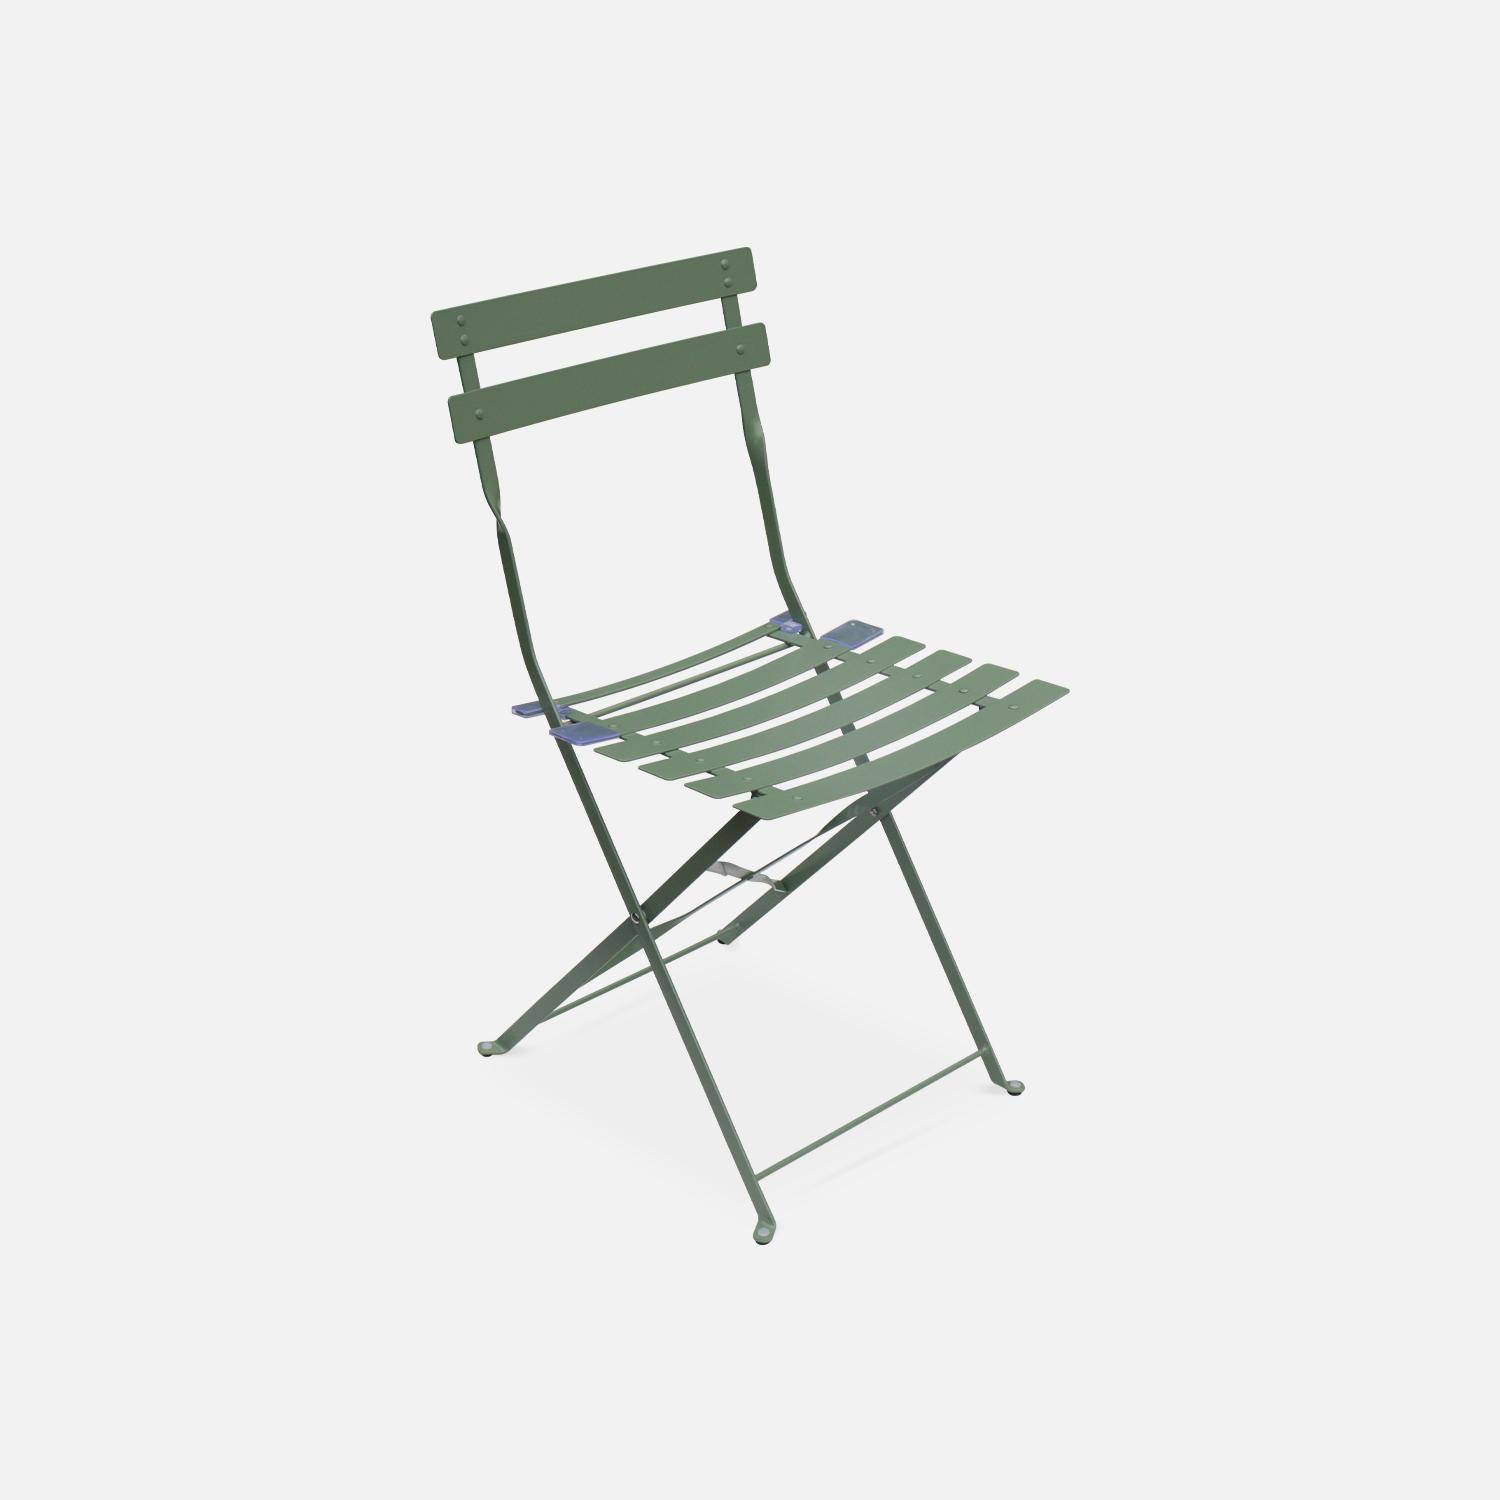 4-seater foldable thermo-lacquered steel bistro garden table with chairs, 110x70cm - Emilia - Sage green,sweeek,Photo4